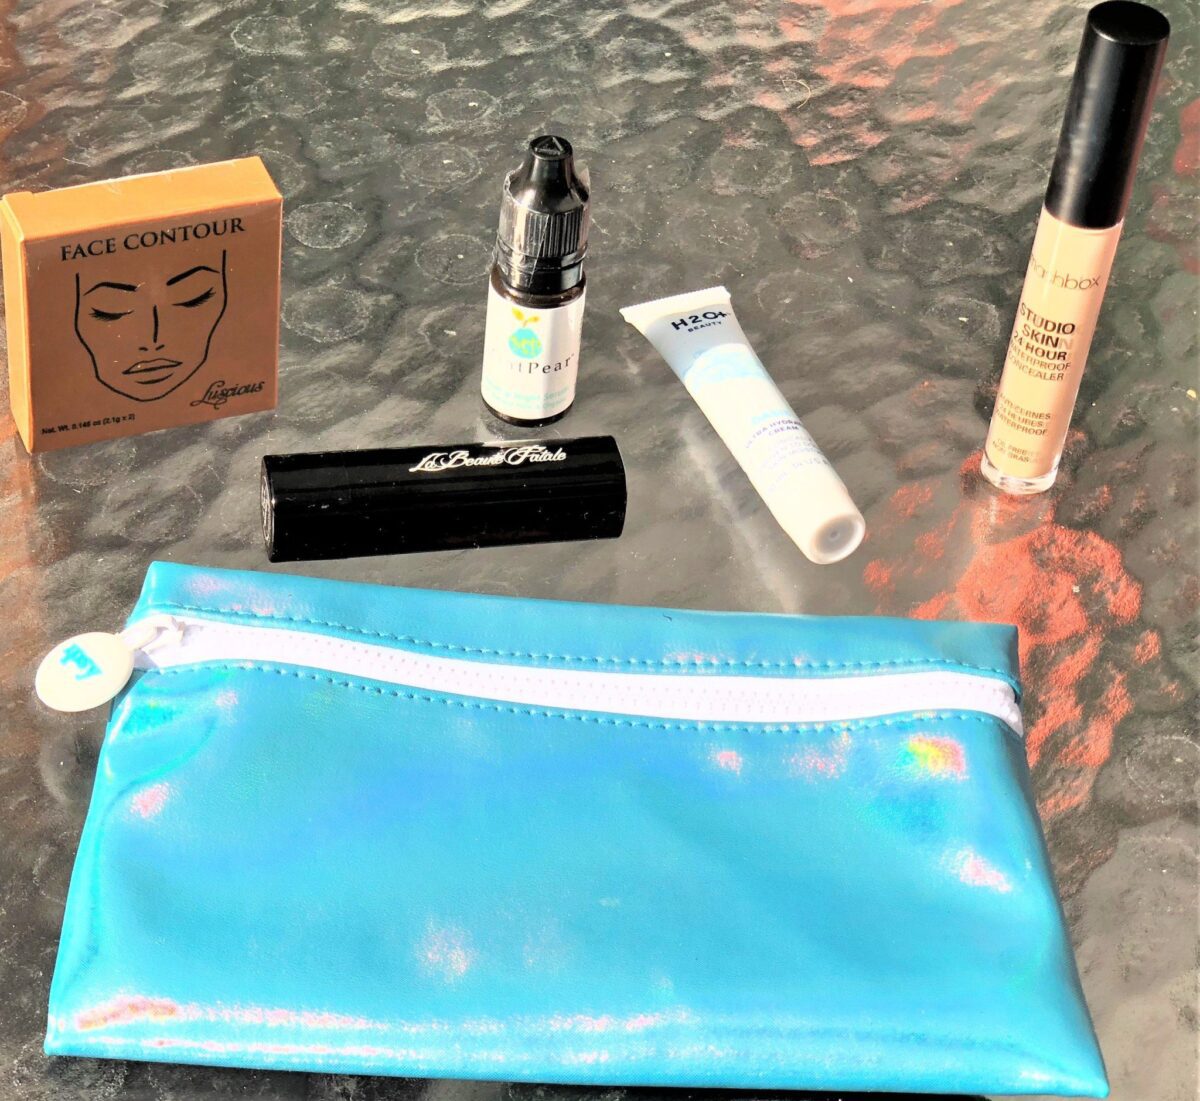 PRODUCTS INSIDE THE POOL READY JULY IPSY BAG